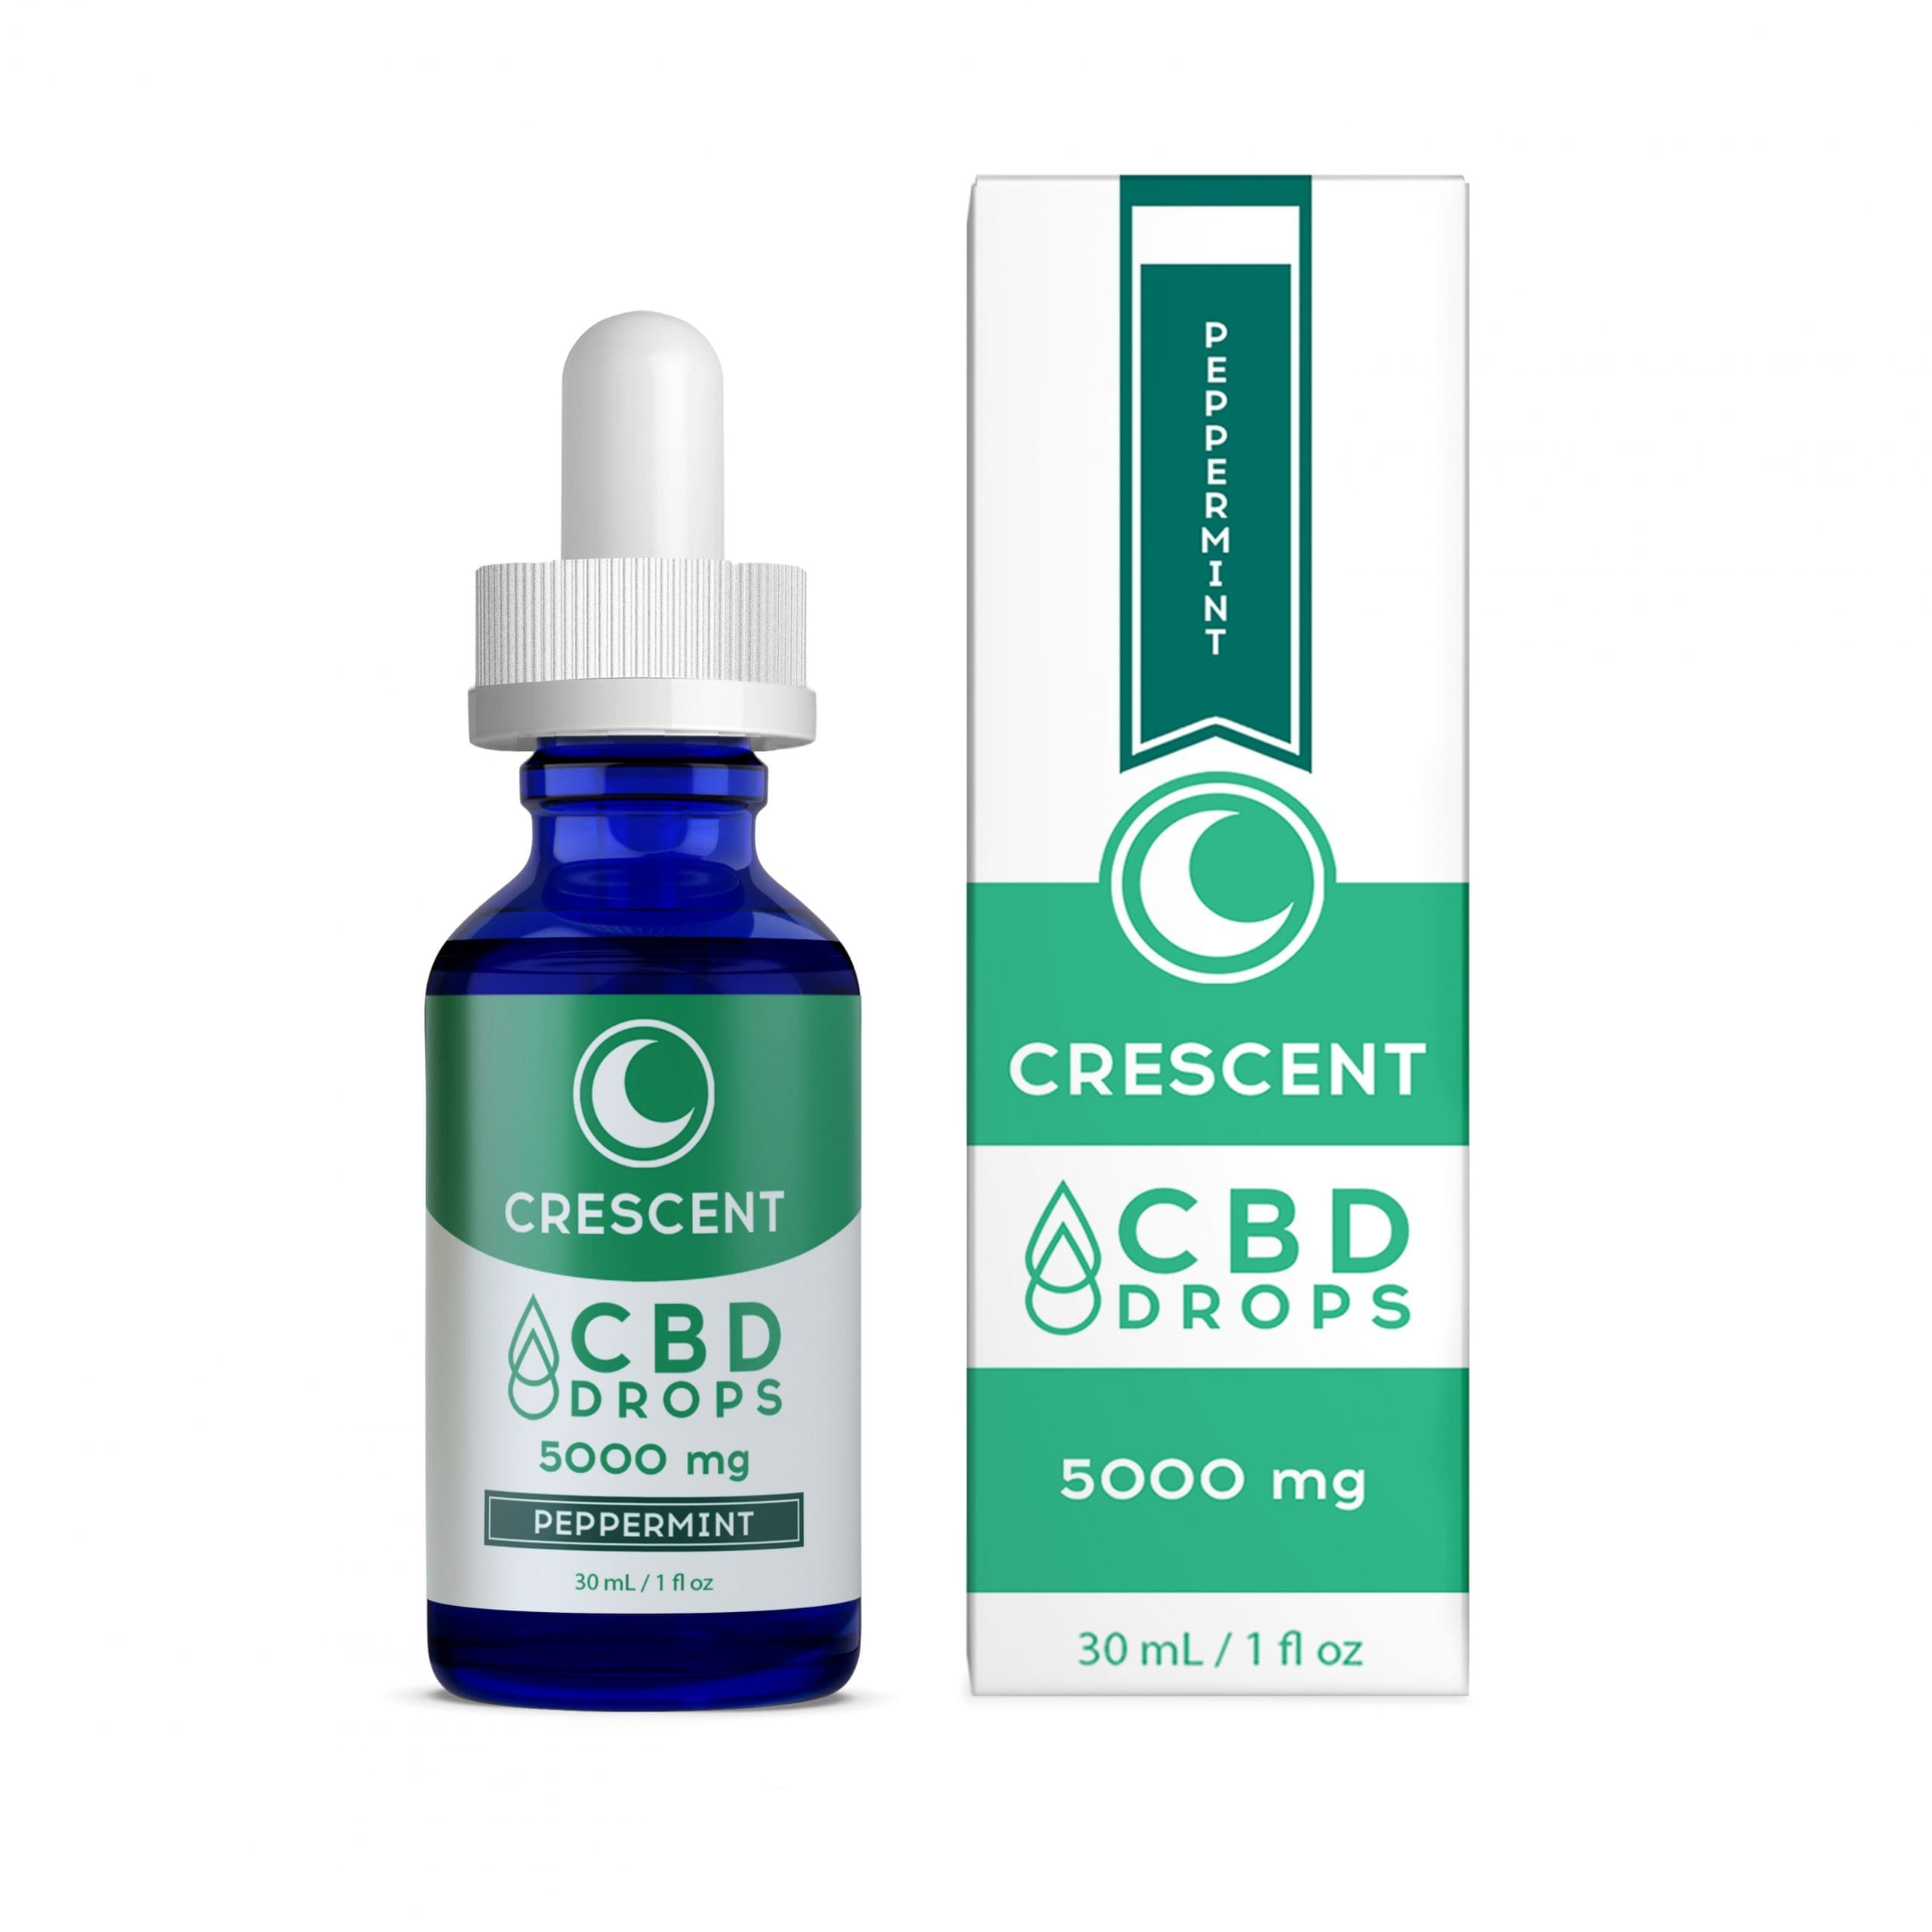 Extra Strength CBD Drops Peppermint with Box